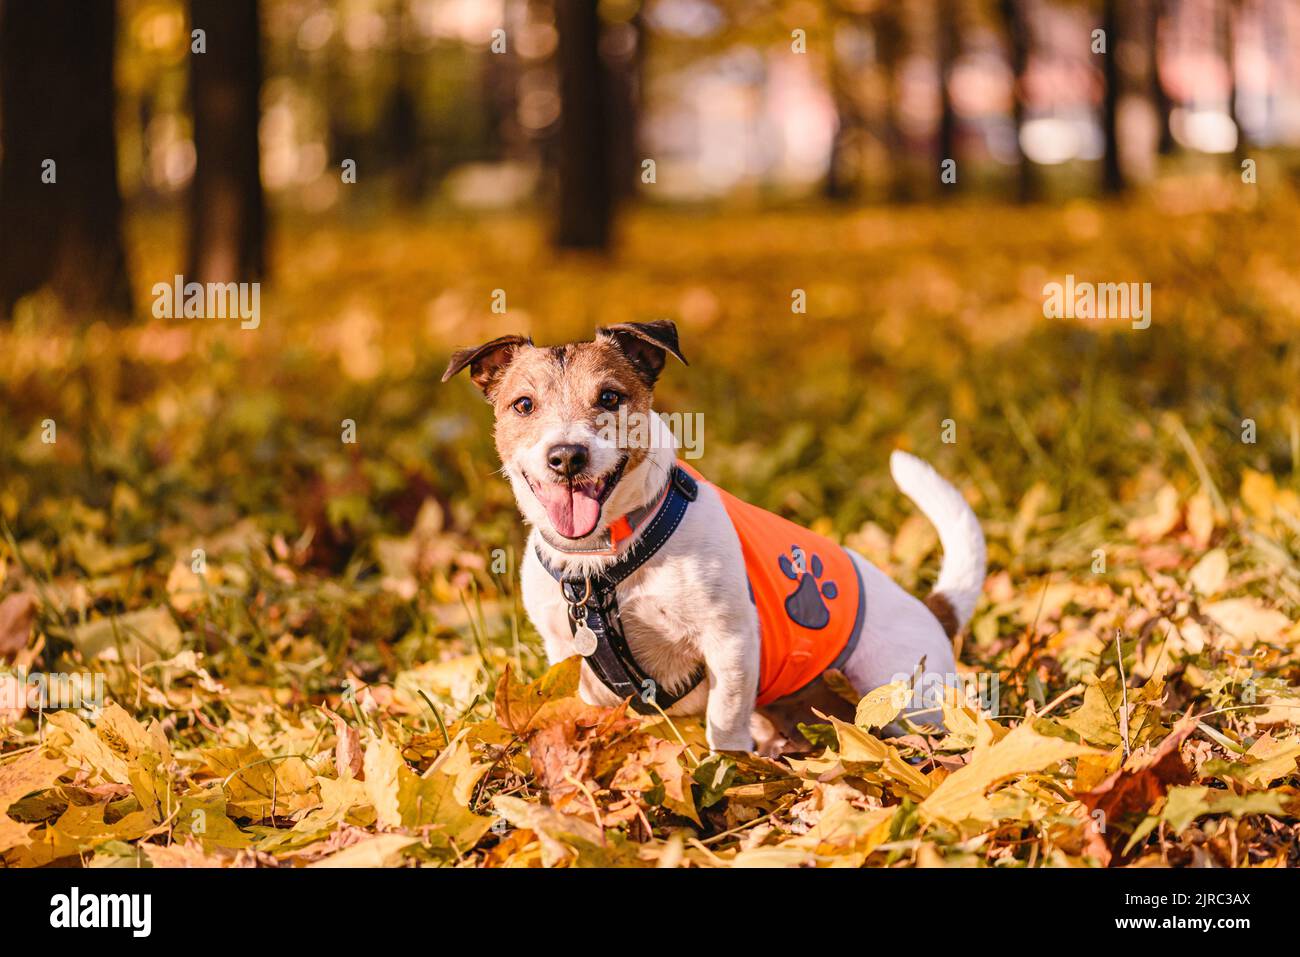 Dog safety concept with happy dog sitting in Fall park wearing orange reflective vest Stock Photo